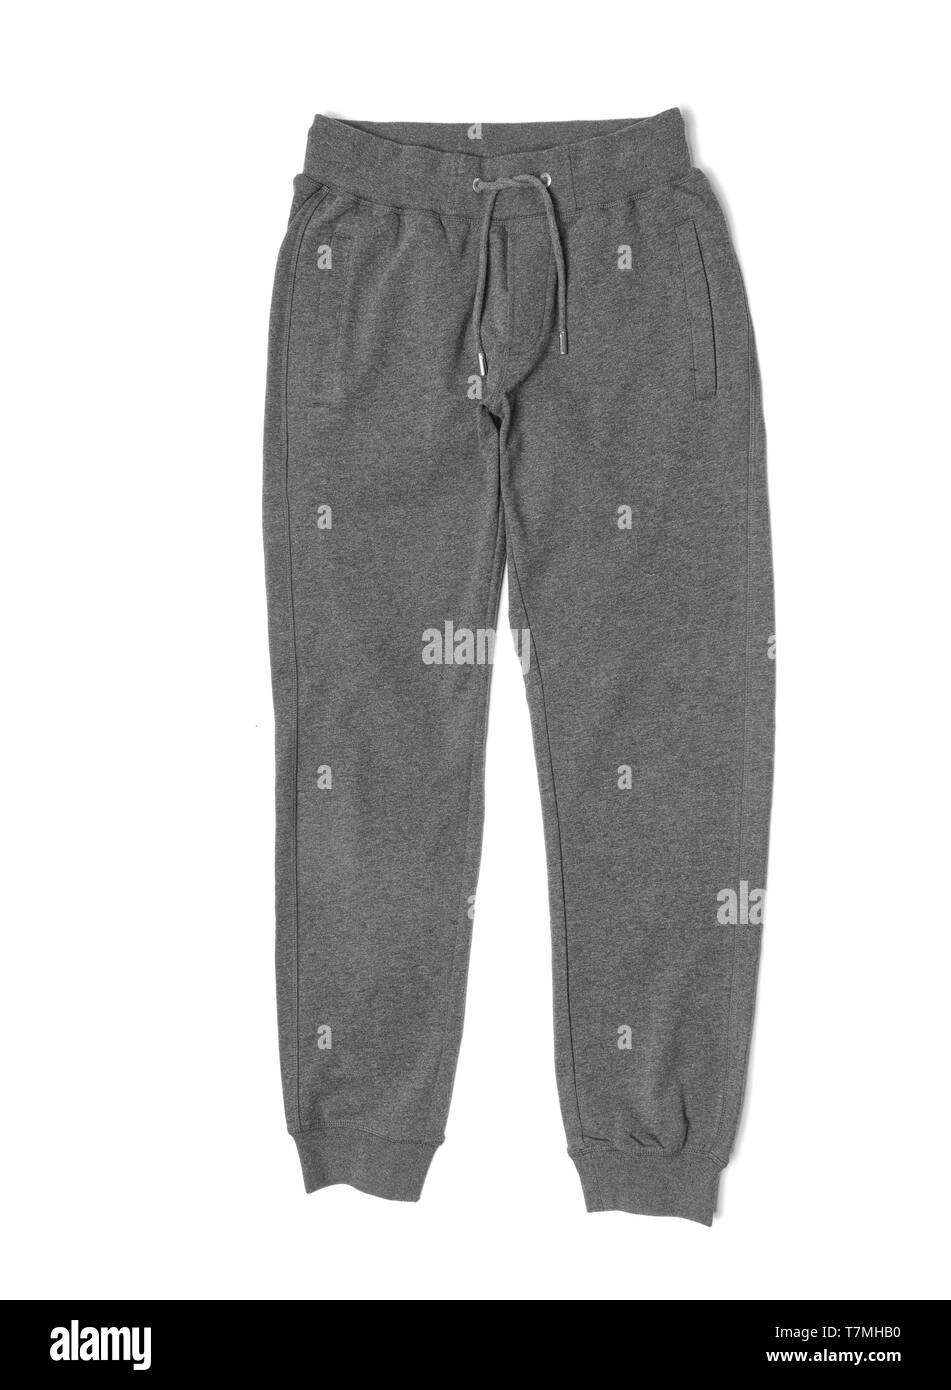 Sweatpants Black and White Stock Photos & Images - Alamy